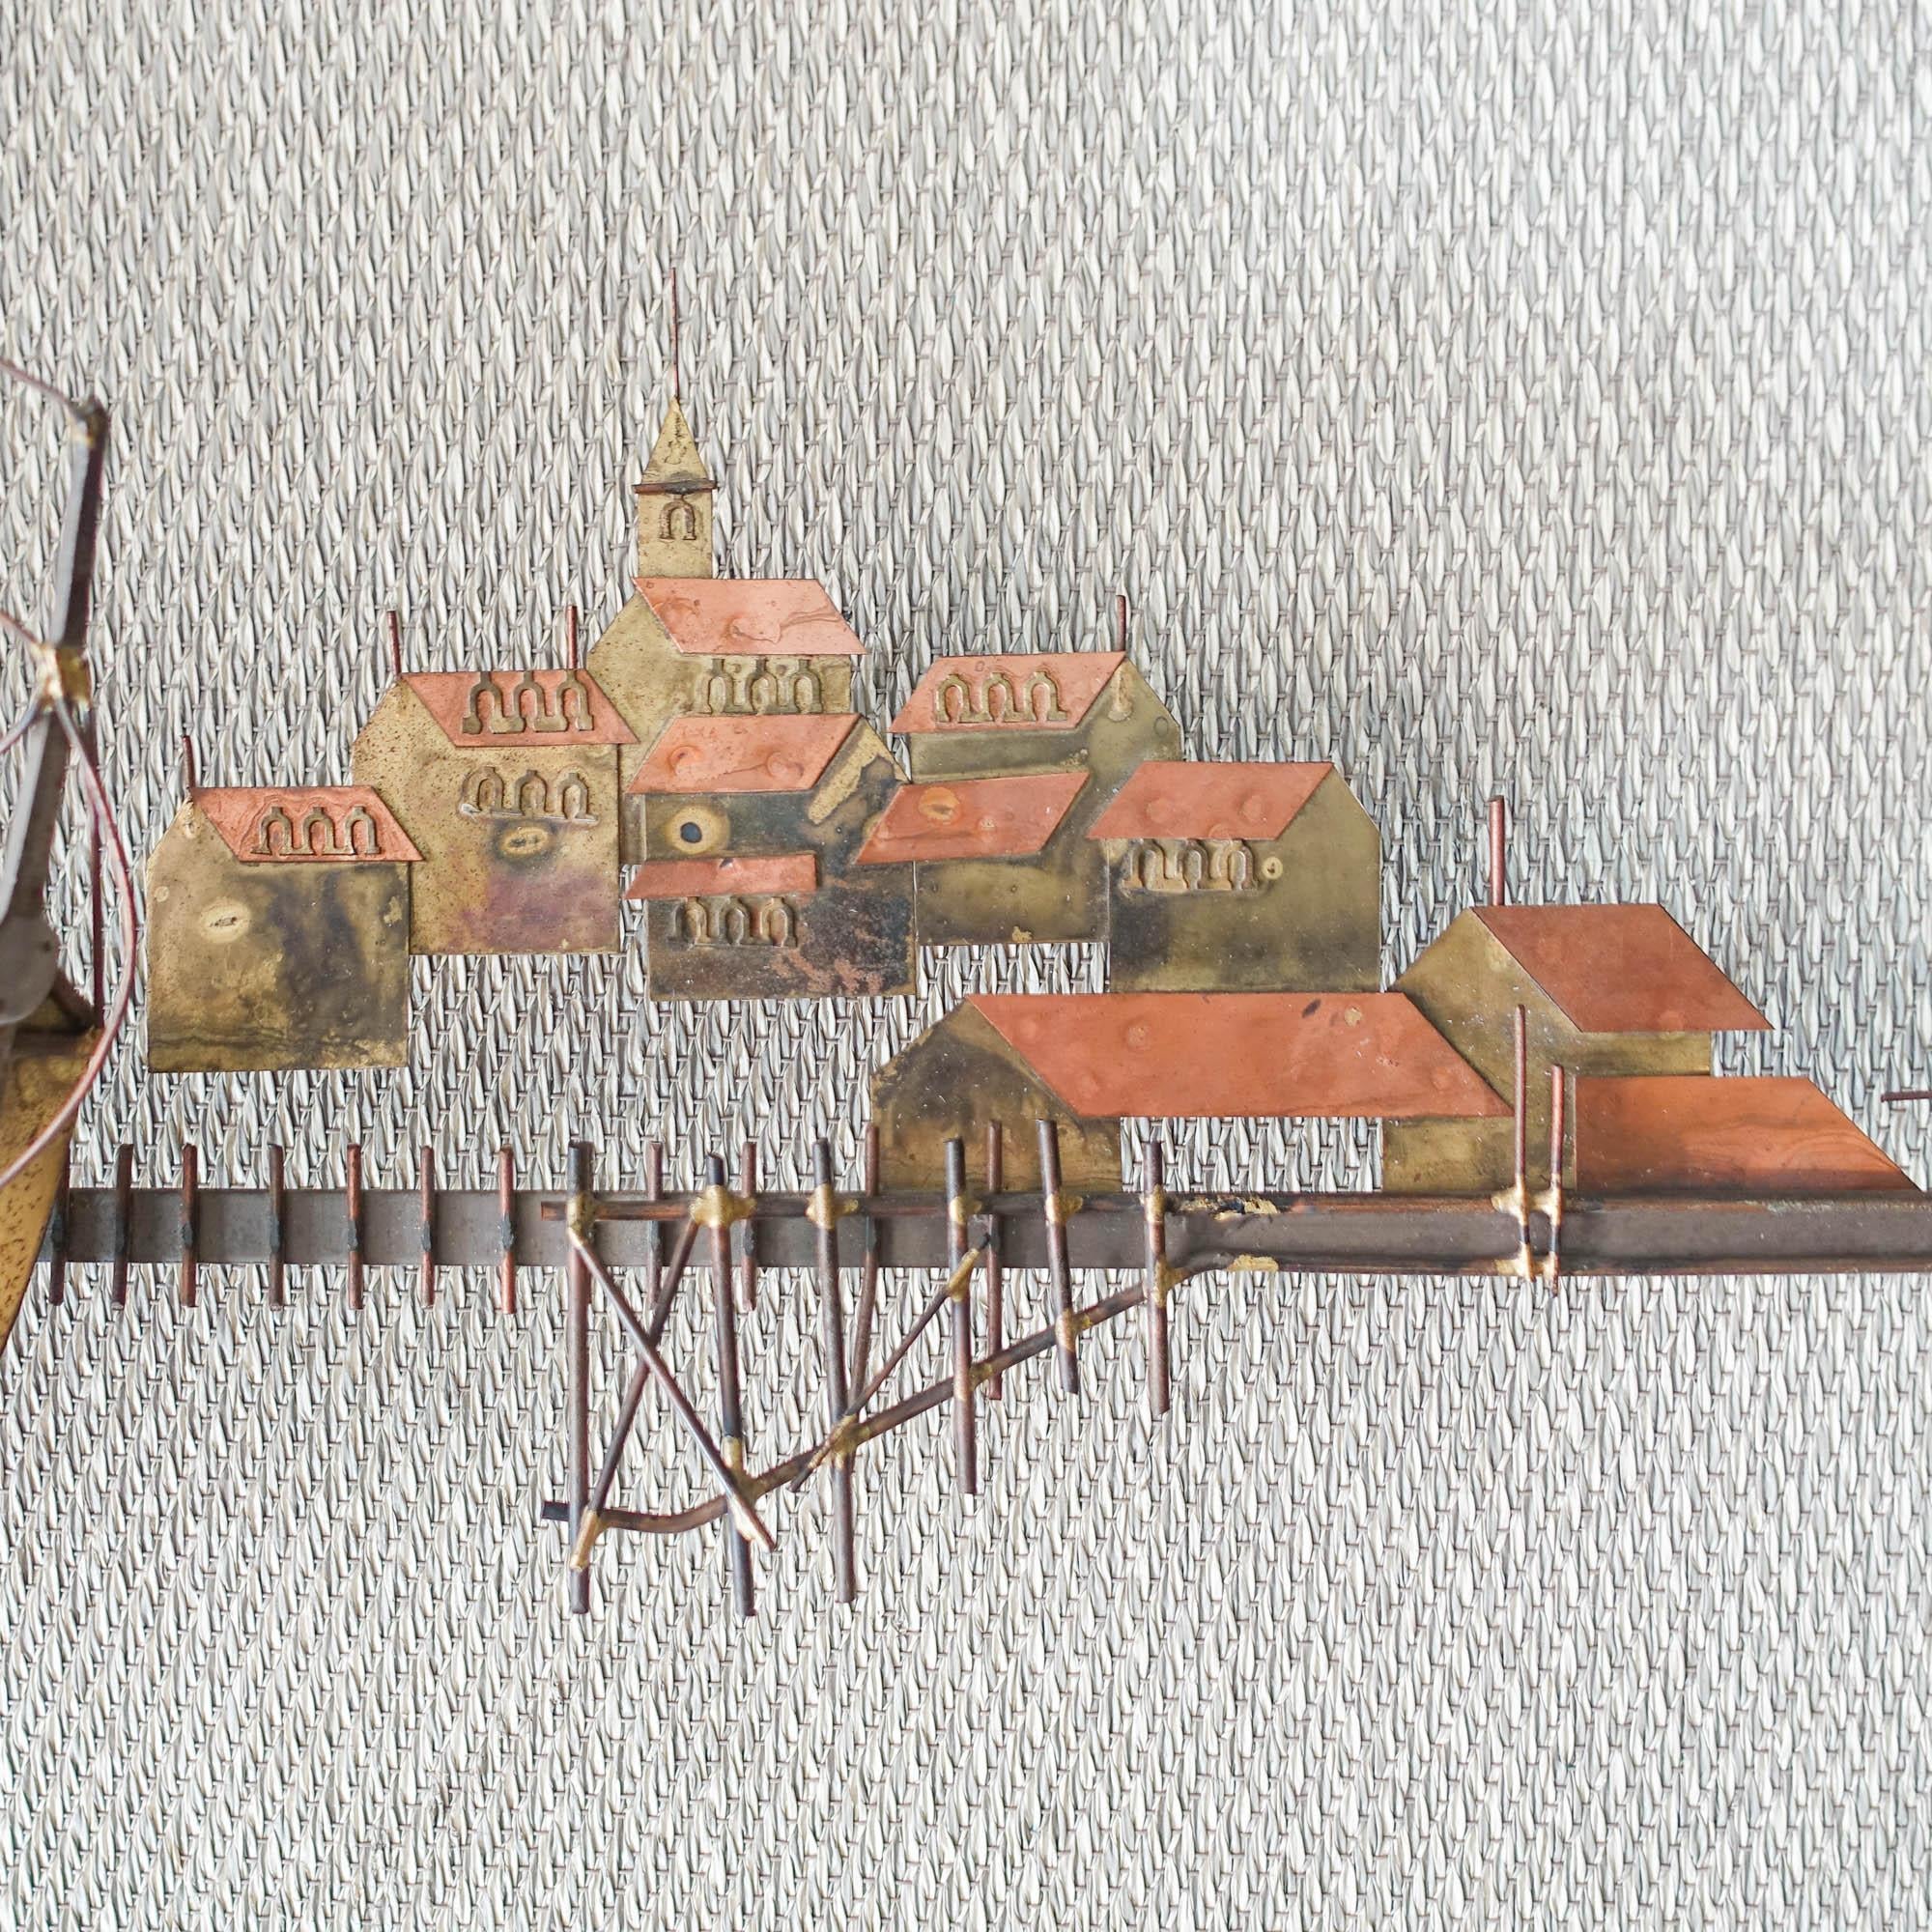 This wall sculpture was designed by Curtis Jere and produced for Artisan House, in USA, during the 1970's. It is made of brass, iron and copper and represents a boat in village and it's port. Curtis Jeré was the shared pseudonym of two artists,